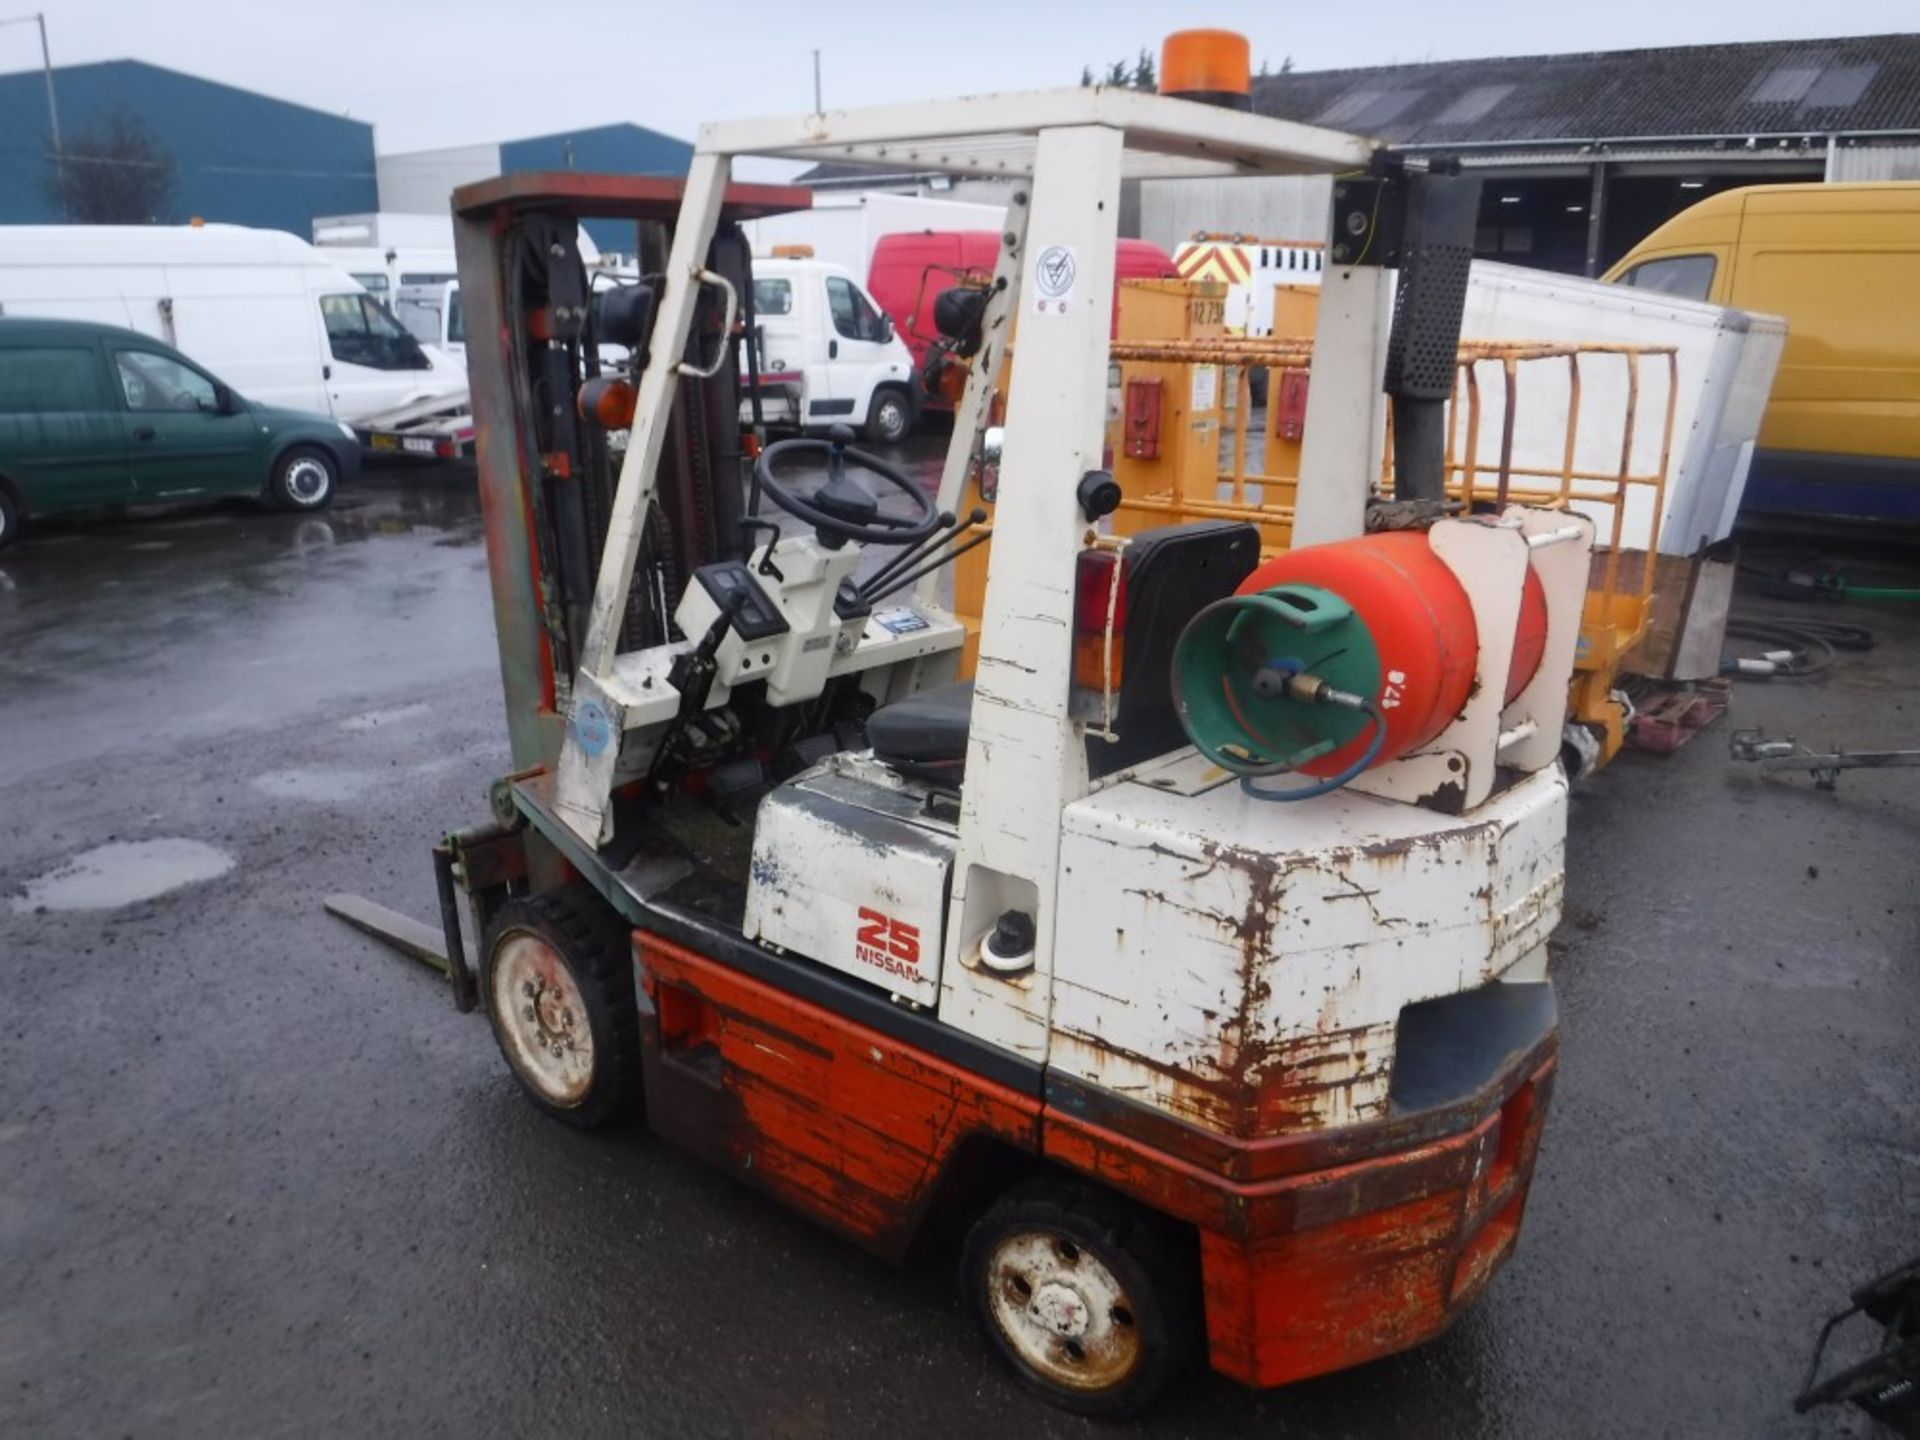 NISSAN 2.5 TON TRIPLE LOW FREE LIFT MAST FORK LIFT WITH SIDE SHIFT, DUAL FUEL [+ VAT] - Image 2 of 2